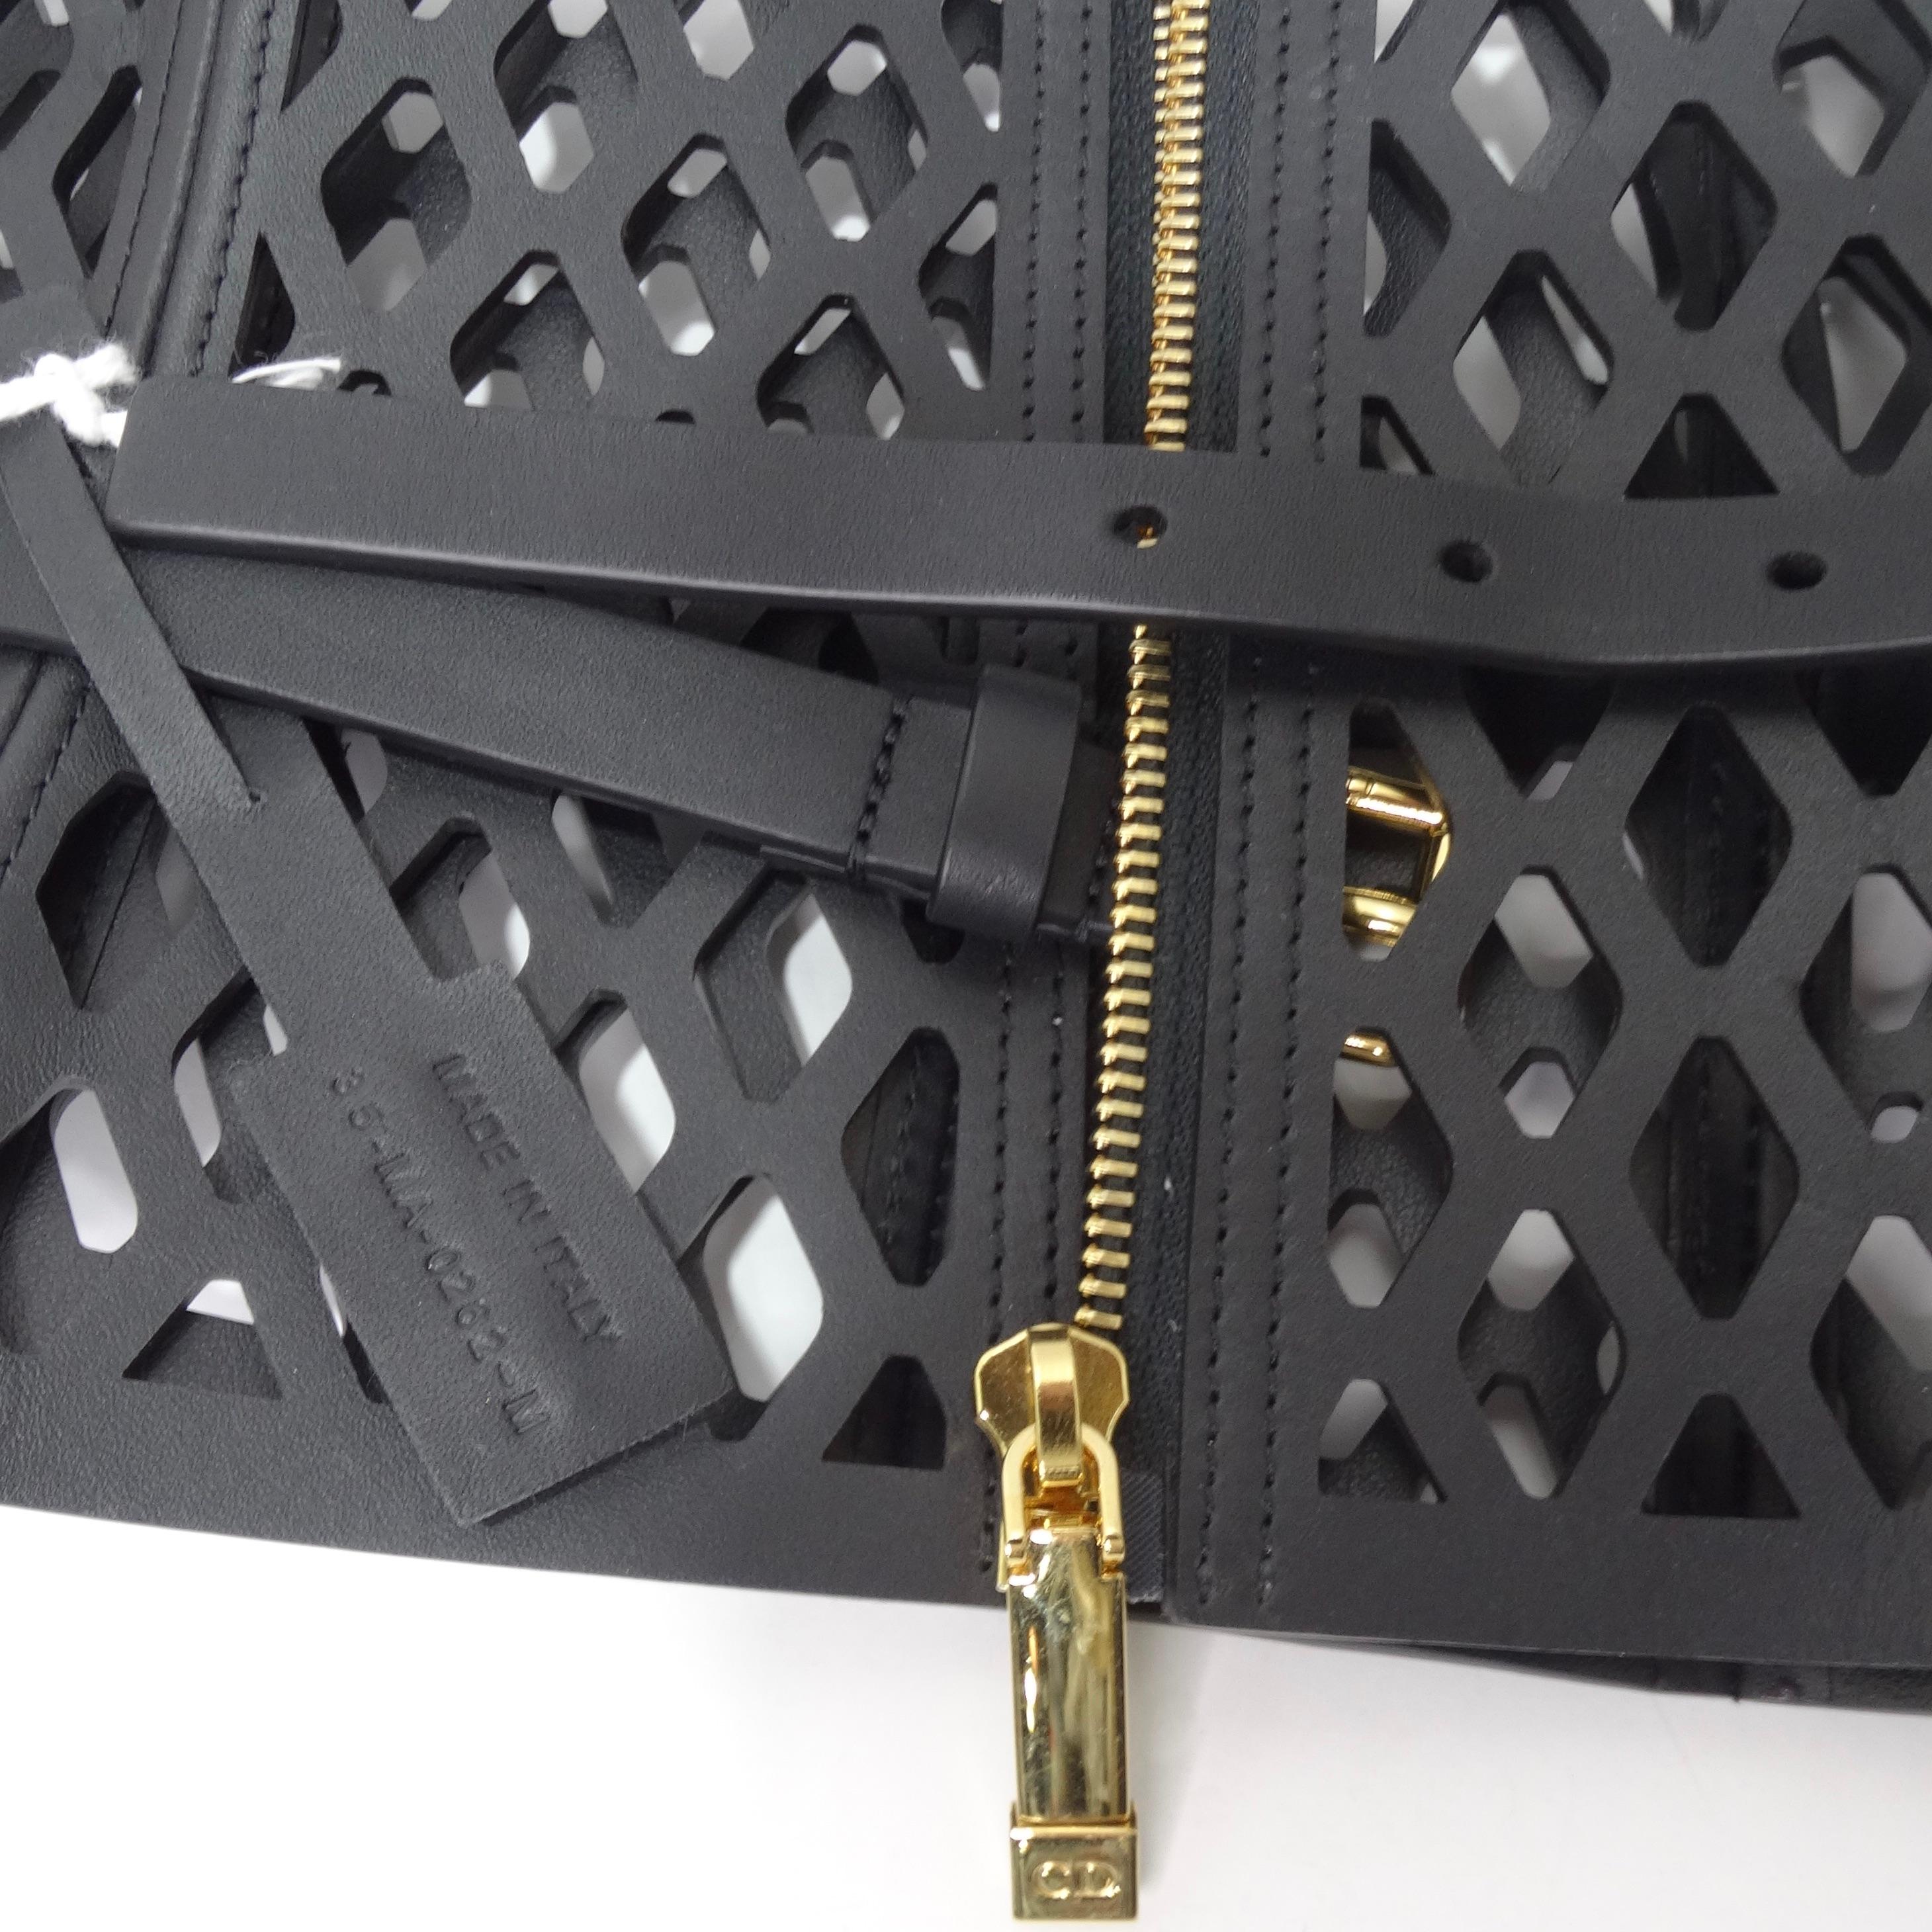 This super unique Dior belt is begging to be added to your wardrobe! With its structured leather cut-out motifs this statement belt is sure to spice up any outfit. Featuring a zipper and gold belt buckle hardware that is adjustable. Pair this over